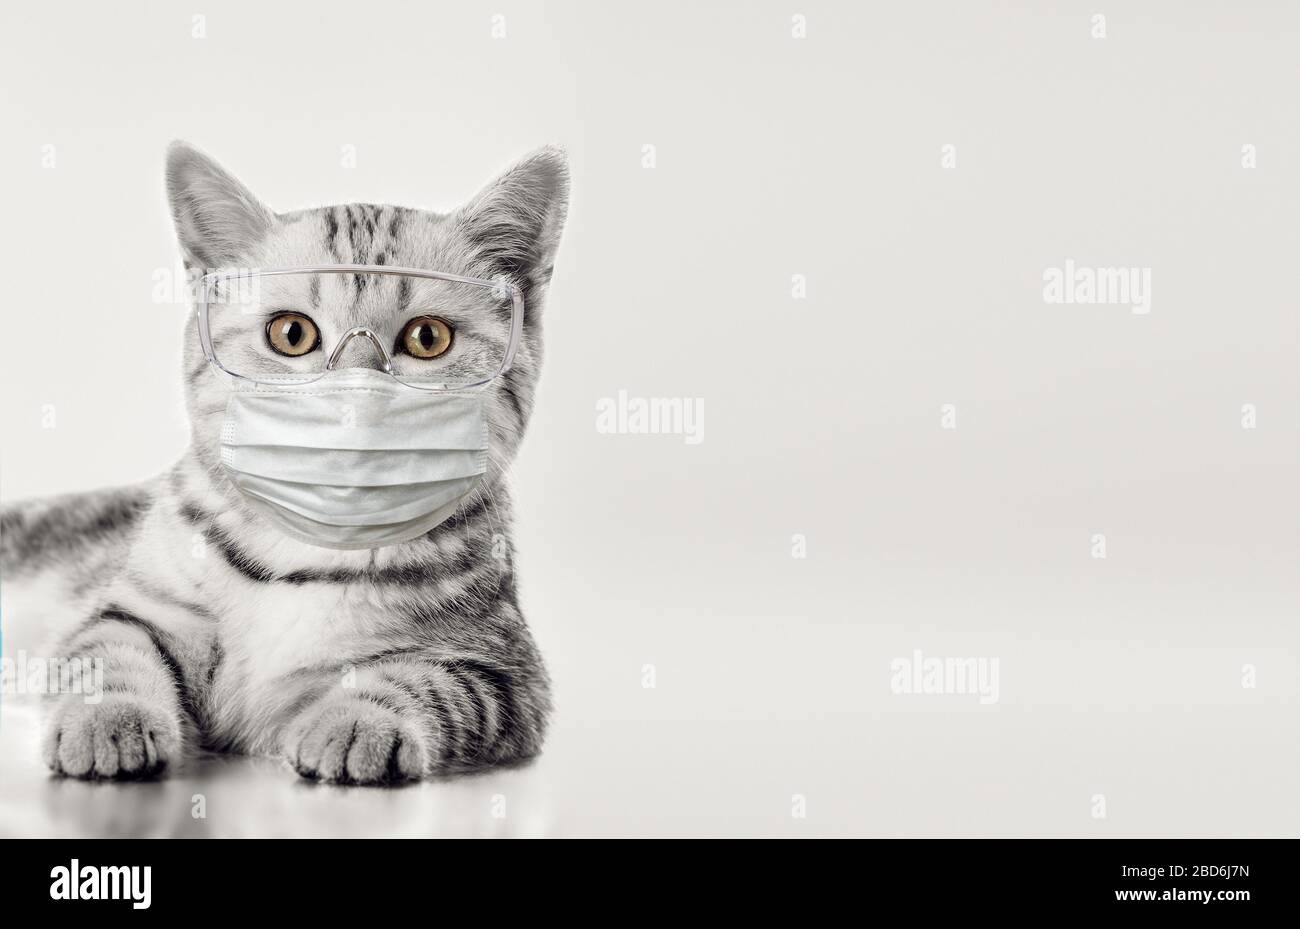 little kitten in medical mask, on grey background, isolated. Concept covid-19 coronavirus pandemic Stock Photo